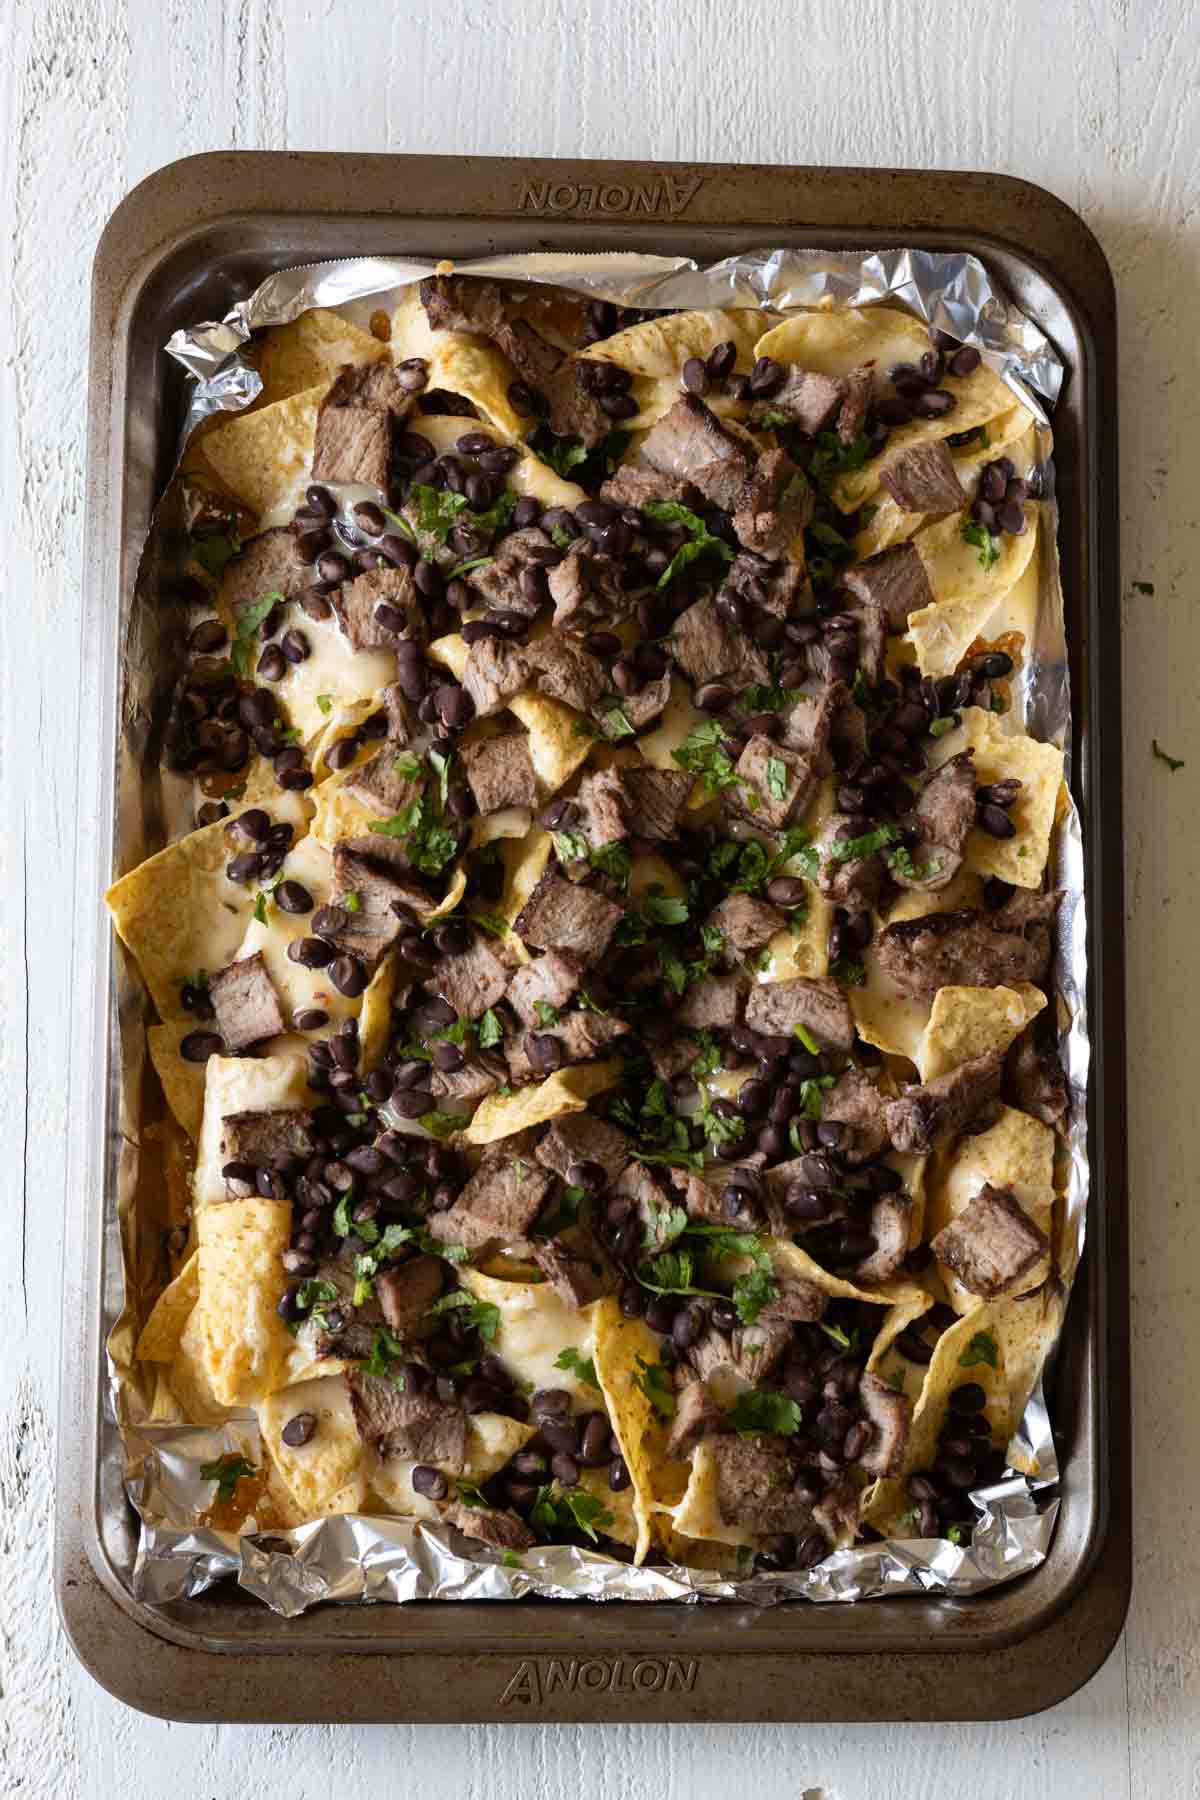 Sheetpan nachos with steak, cheese, and black beans.